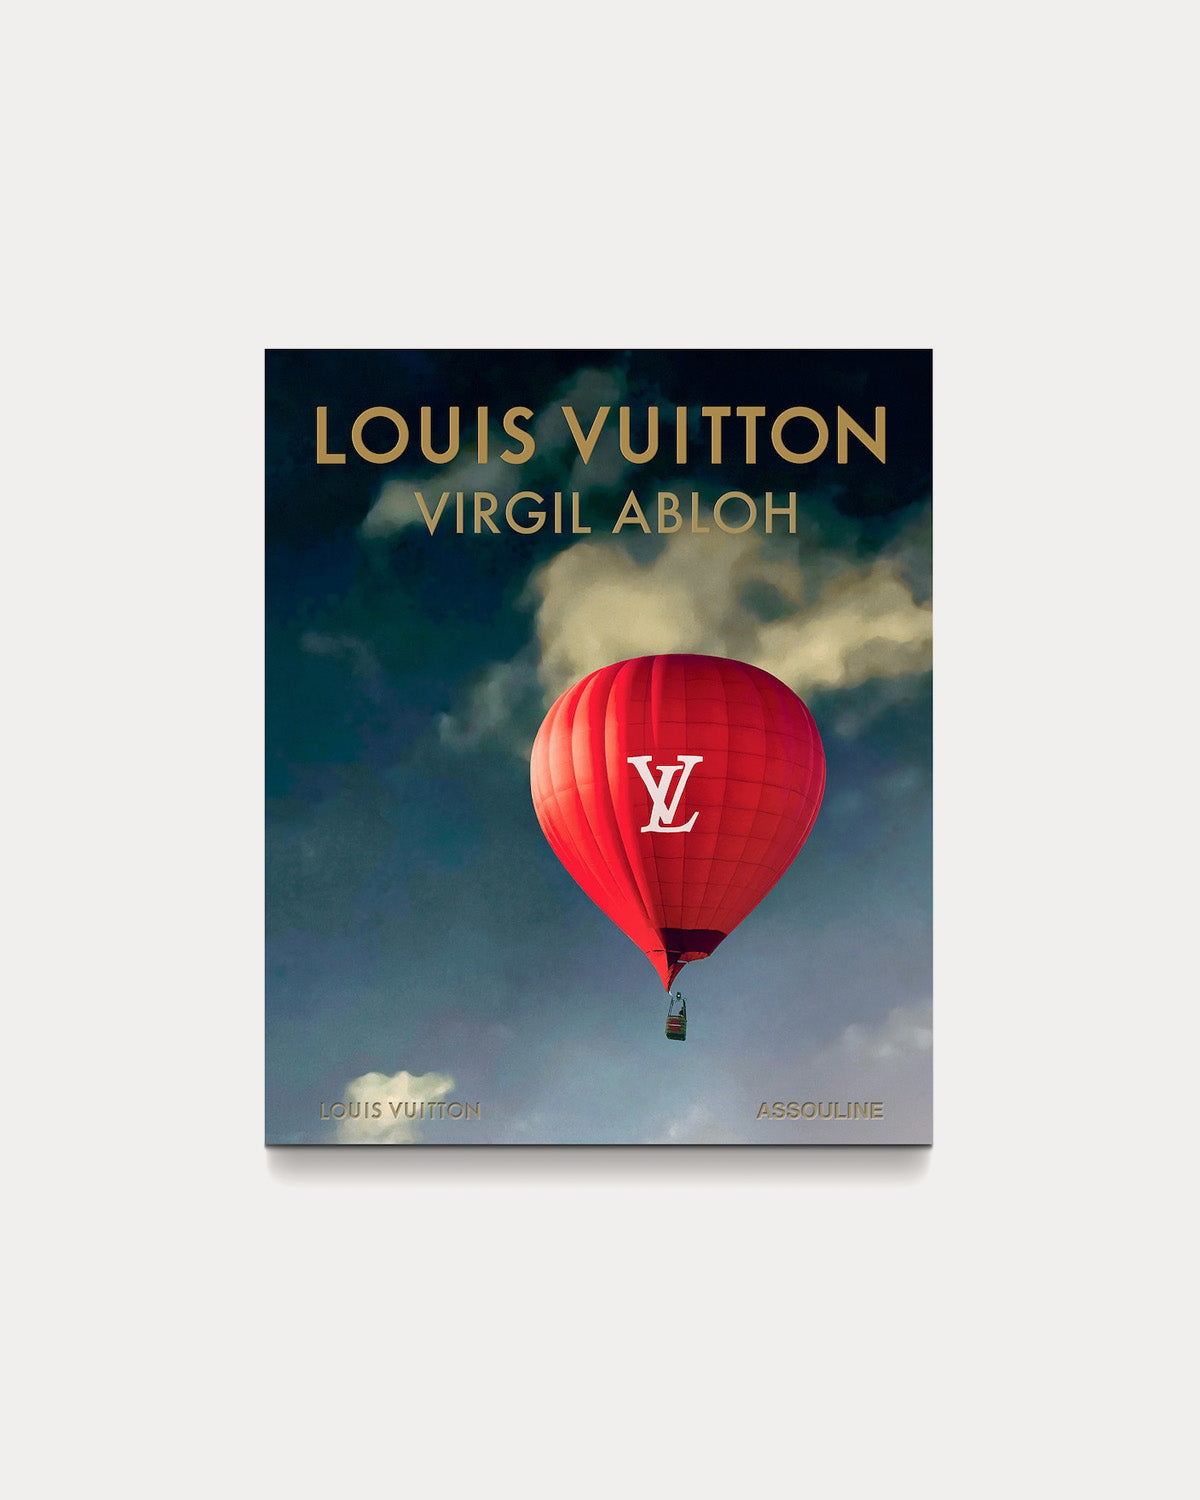 Louis Vuitton on X: Imagining the impossible. @VirgilAbloh's puppets  represent the fundamental belief in inclusivity embedded within the # LouisVuitton Men's collections. Explore the new #LVMenSS21 campaign shot by  #TimWalker at